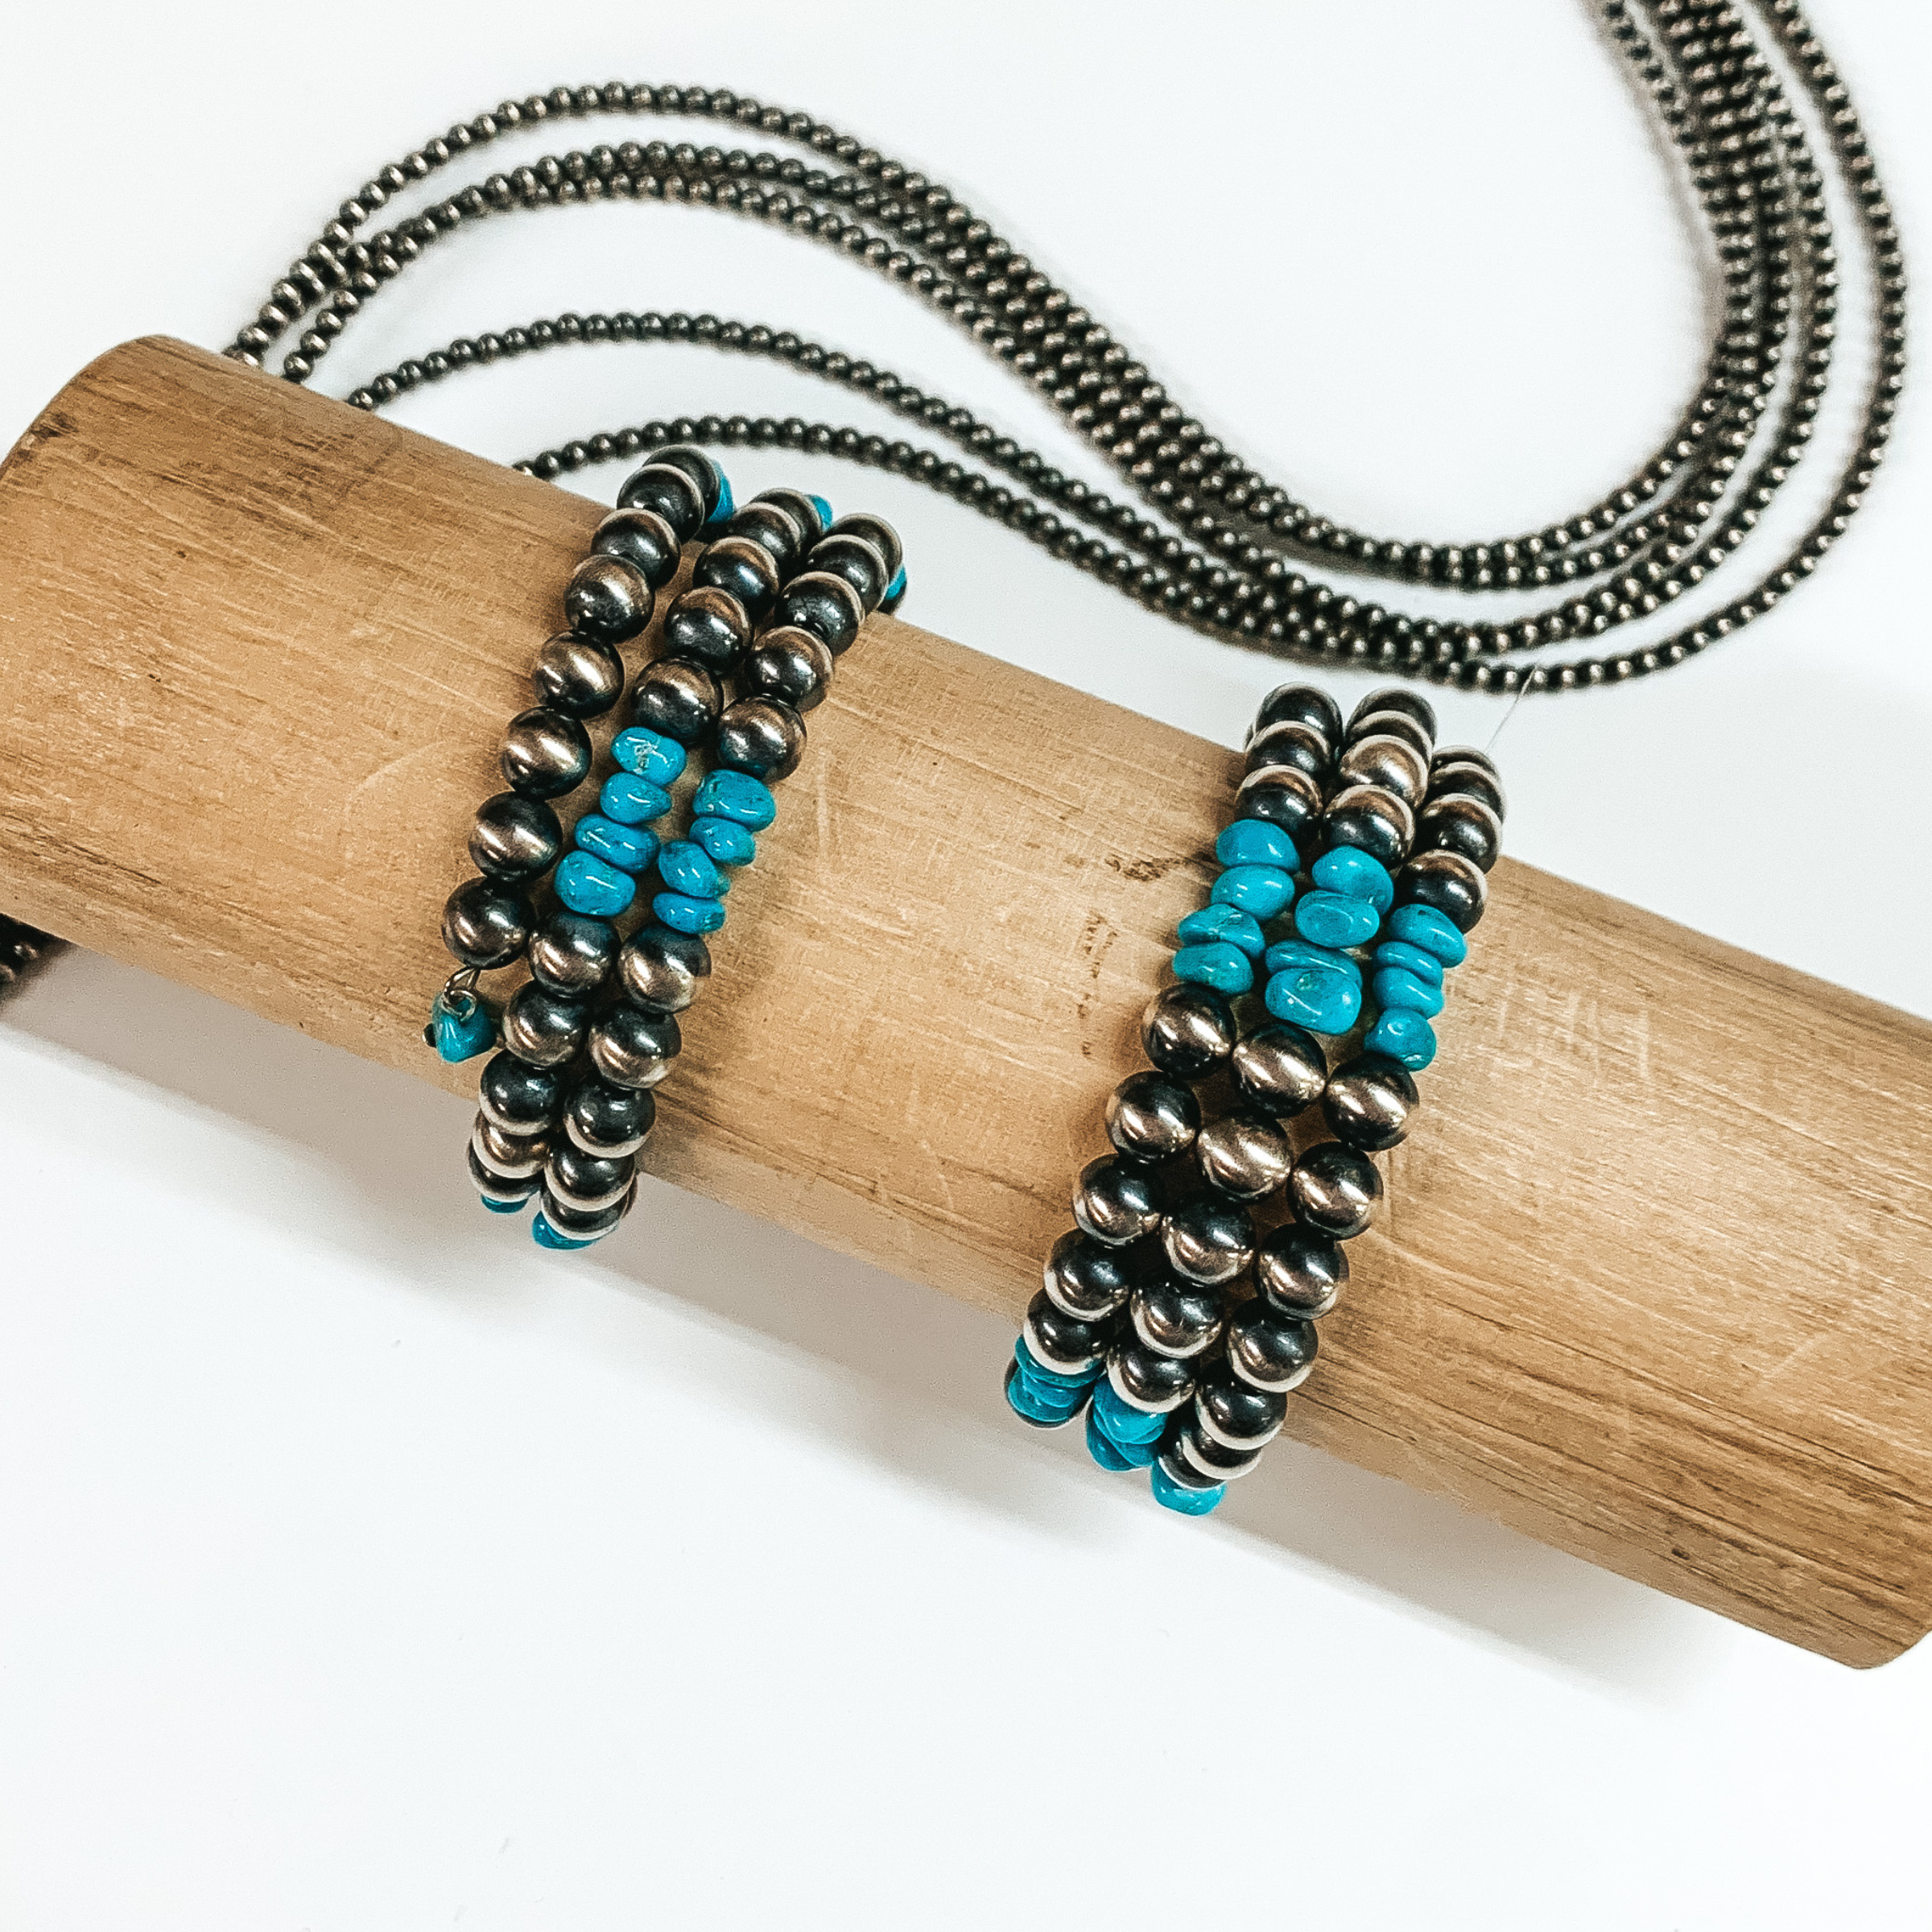 Three silver and turquoise beaded wrap bracelets pictured on a tan bracelet holder on a white background. 